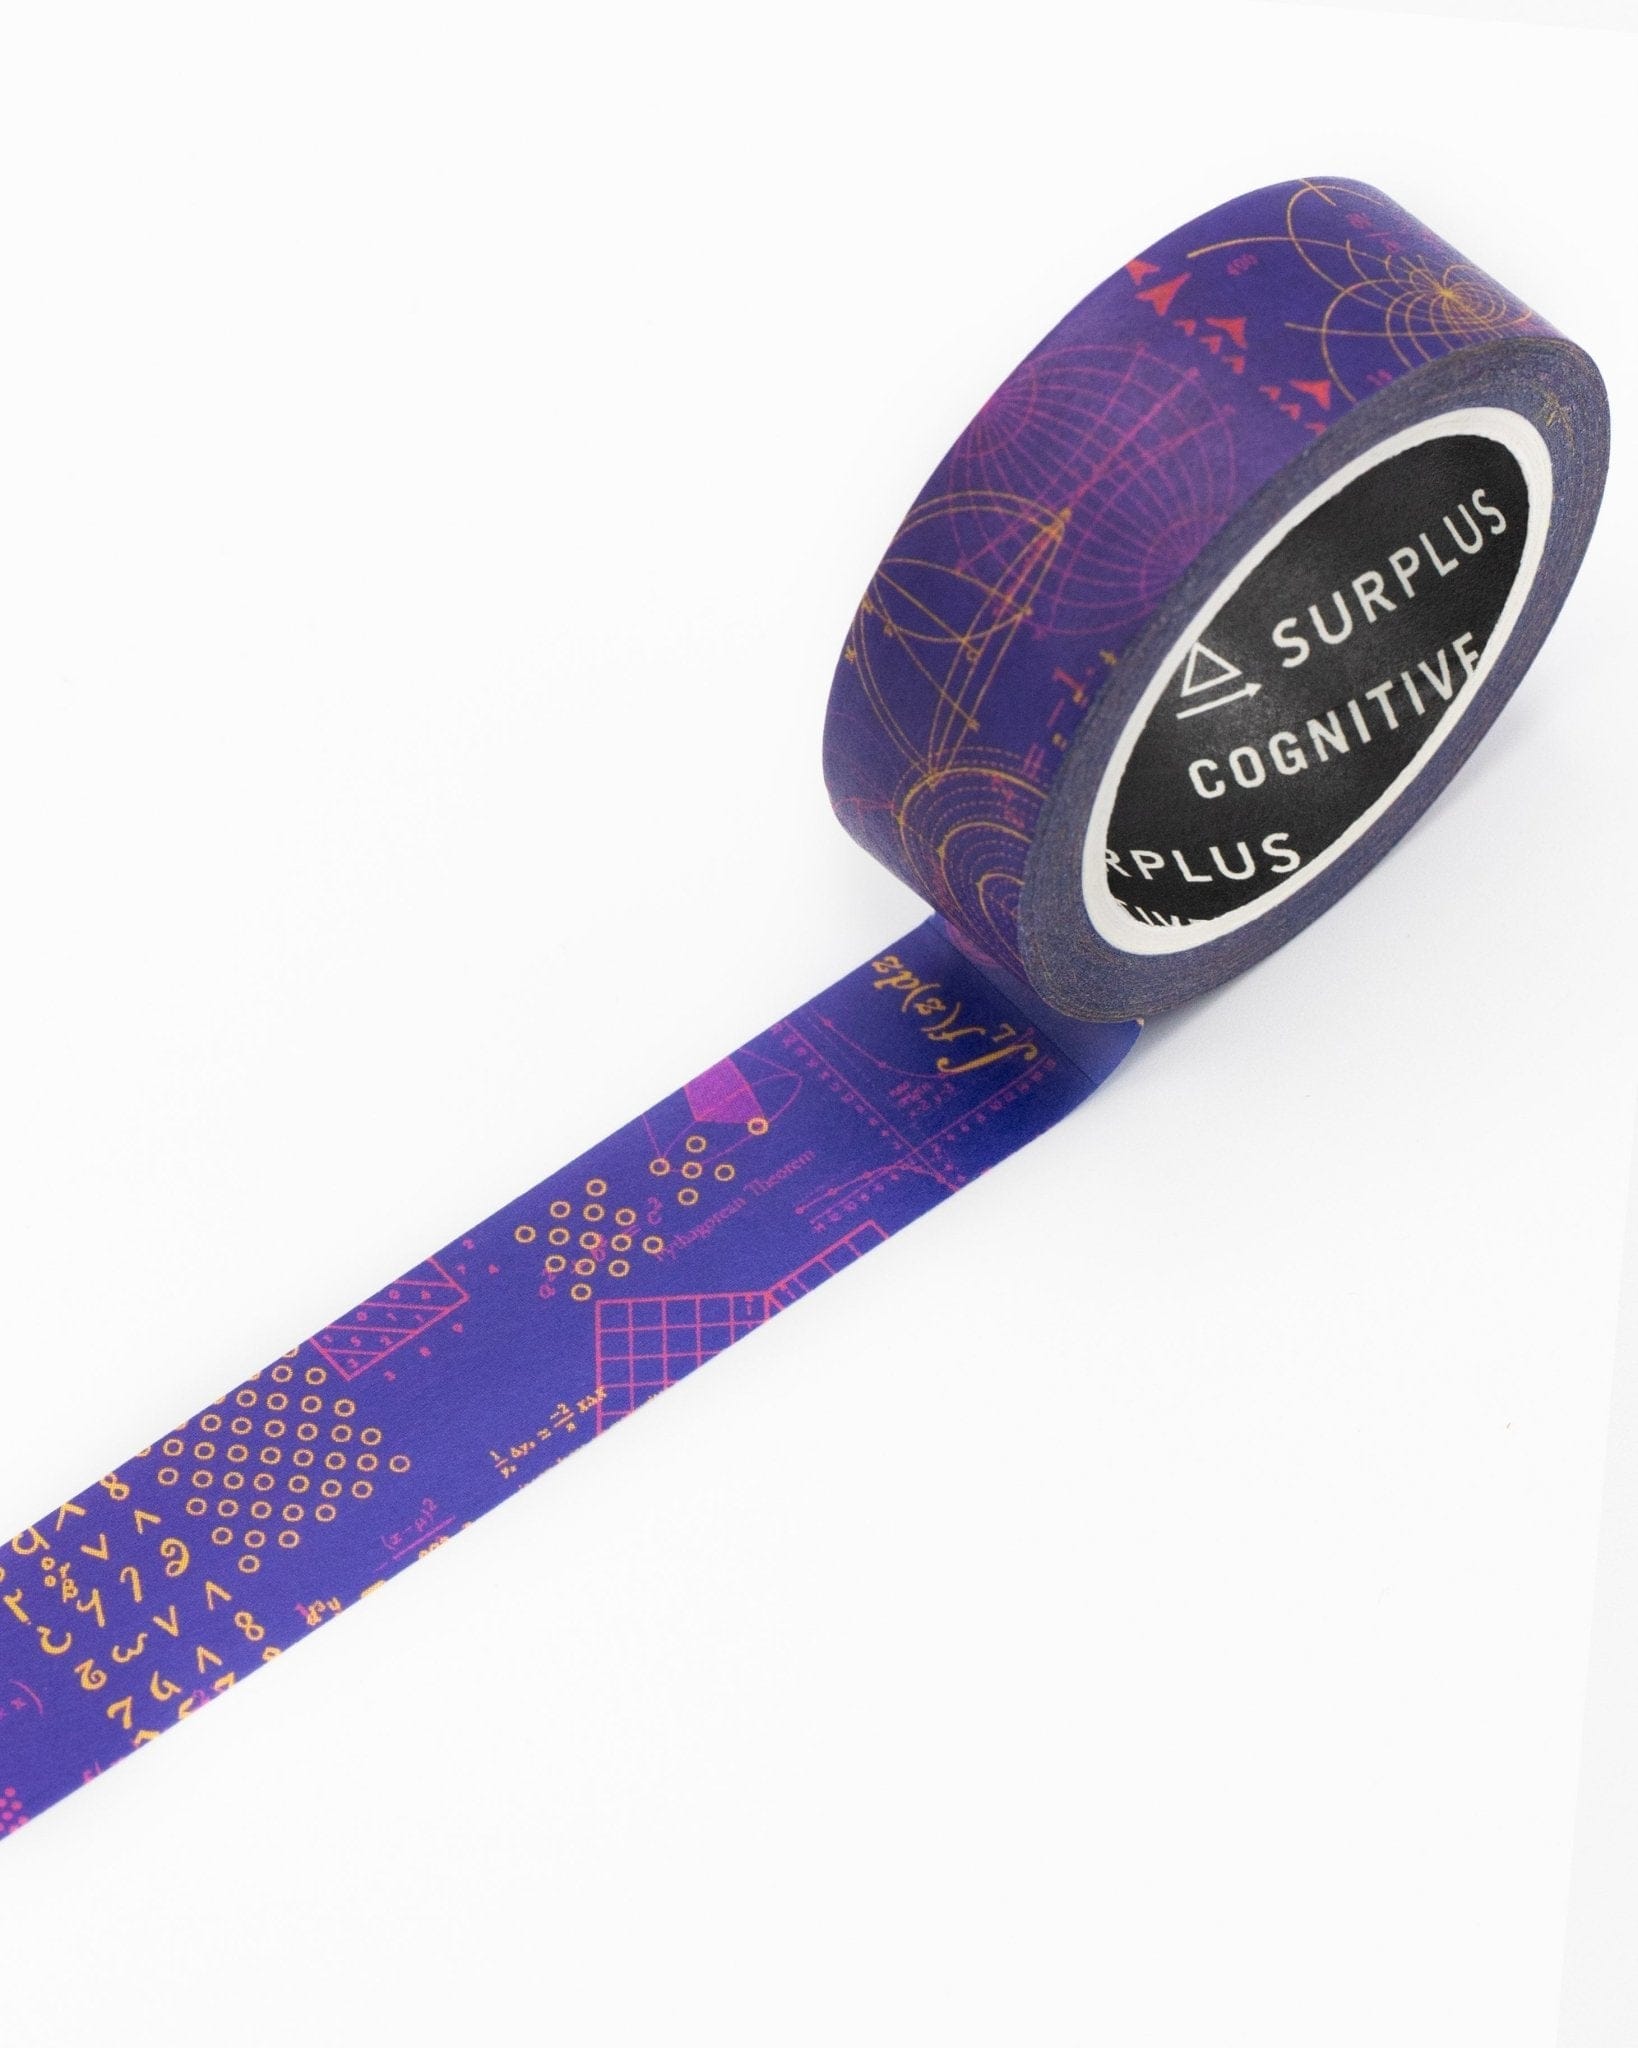 Equations That Changed the World Washi Tape Cognitive Surplus